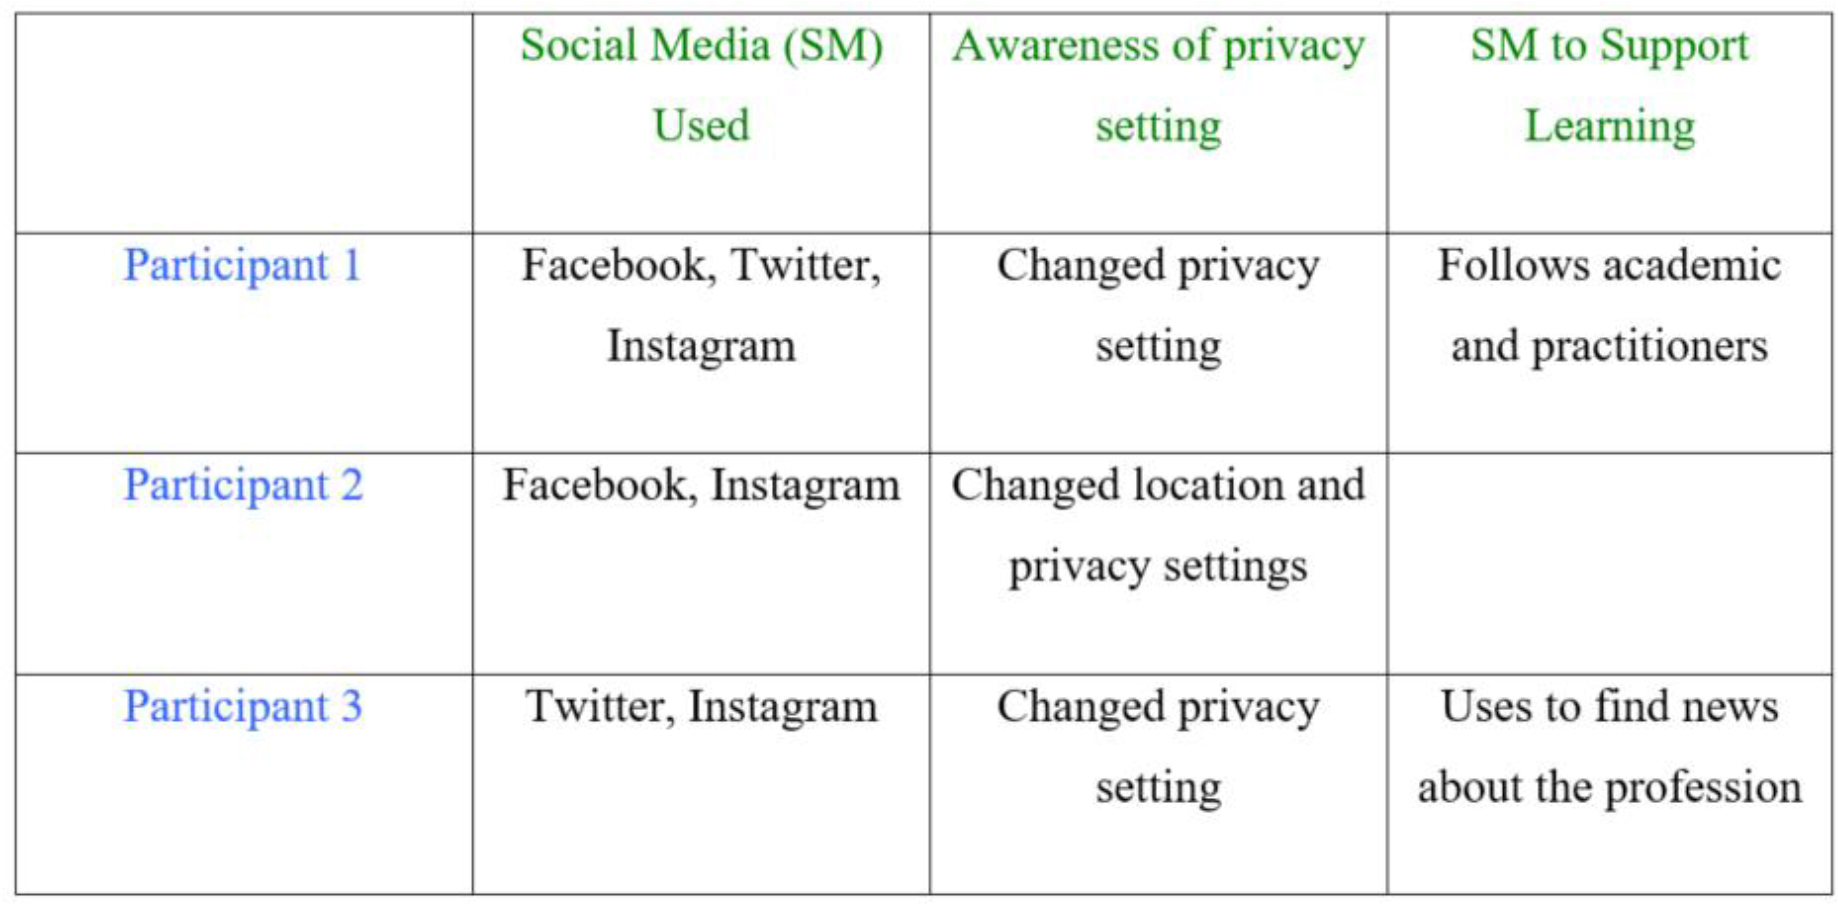 An image in a tabular form shows an example of the analytical matrix with three participants and types of social media, awareness of privacy setting, support learning.